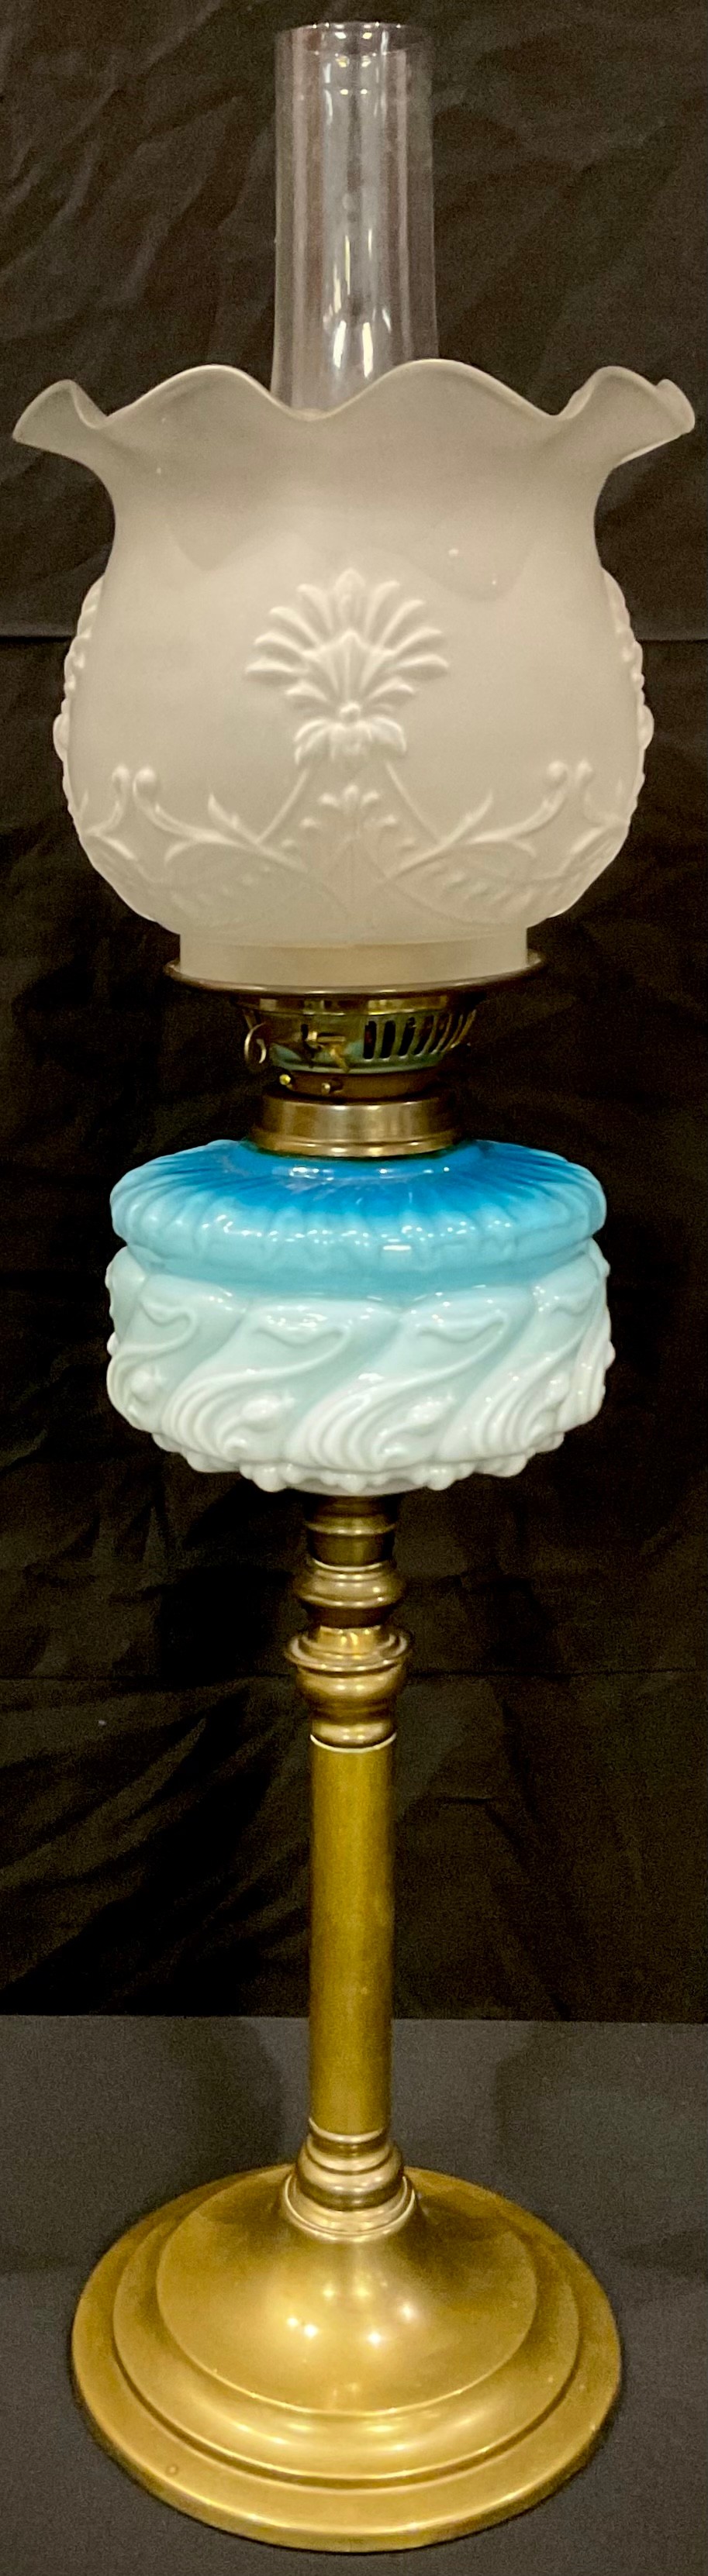 An Art Nouveau oil lamp, frosted glass shade, moulded blue and milk glass font, brass column on